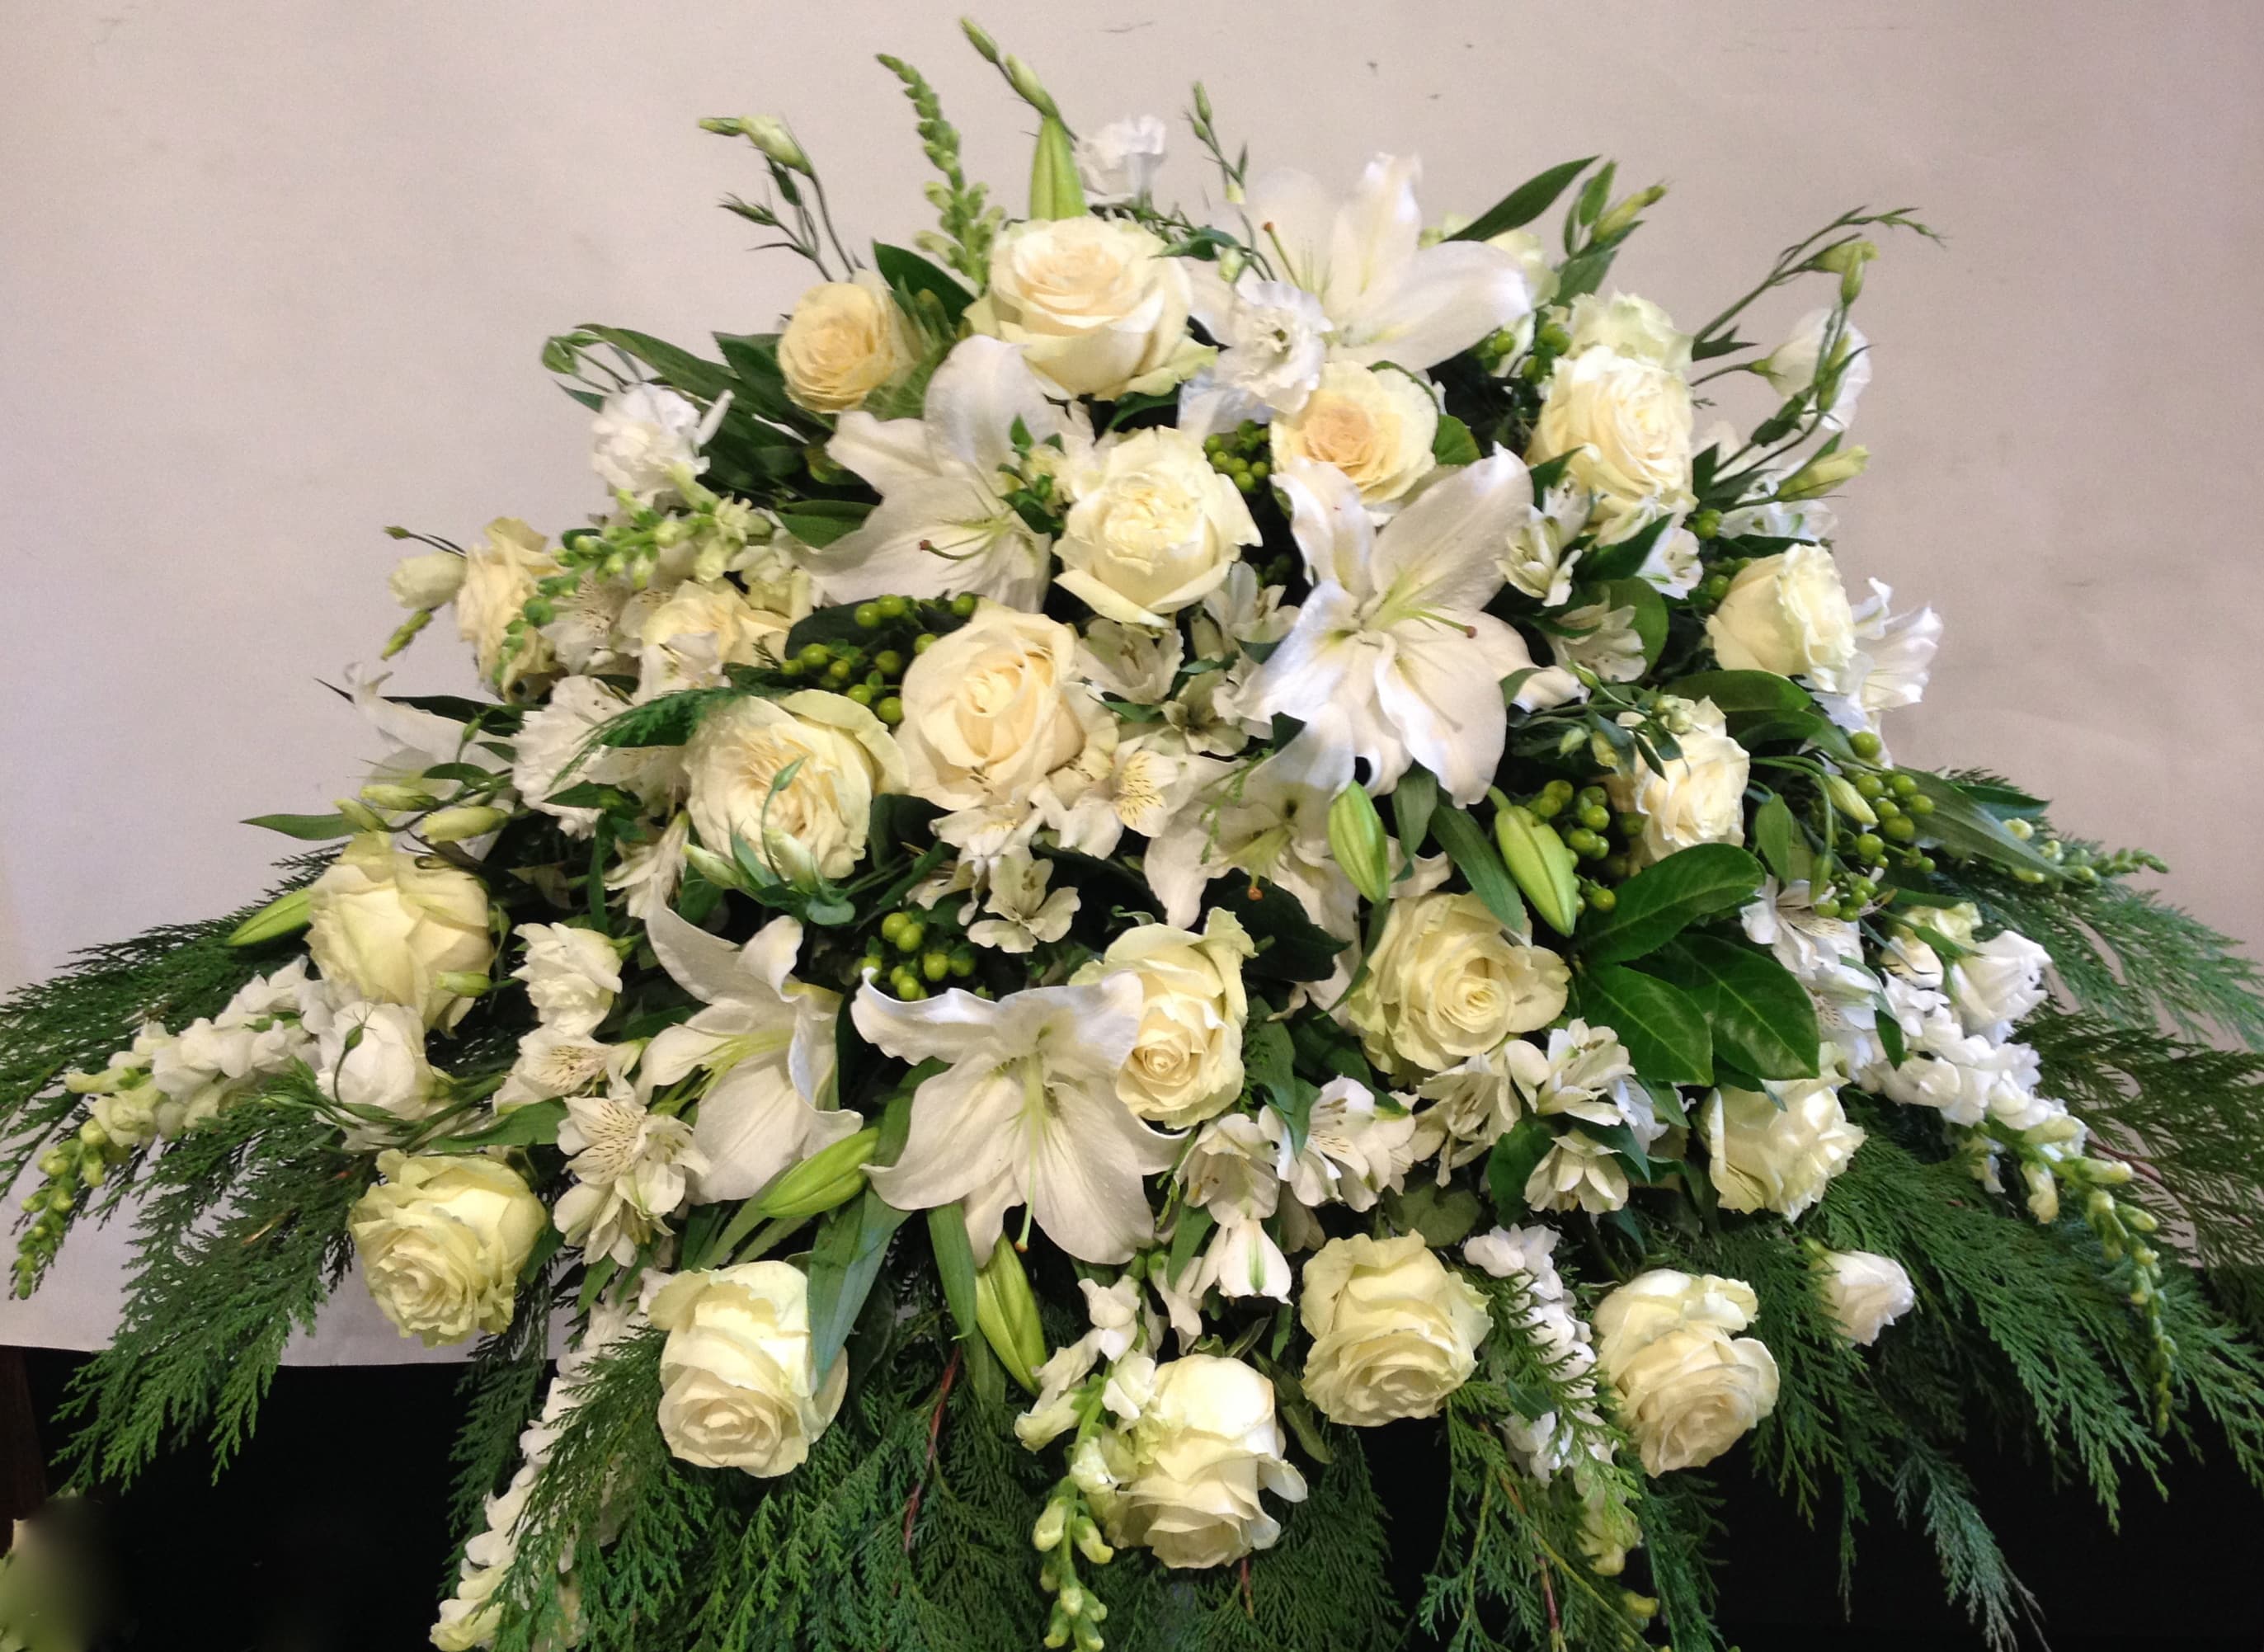 Pure White Casket Blanket  - This casket blanket inspires thoughts of comfort and peace to those wishing to pay their respects for the loss of the deceased. White roses, lilies, snapdragon and other seasonal flowers are accented with an assortment of the finest lush greens to create the perfect arrangement to display on the top of their casket during their final farewell service.